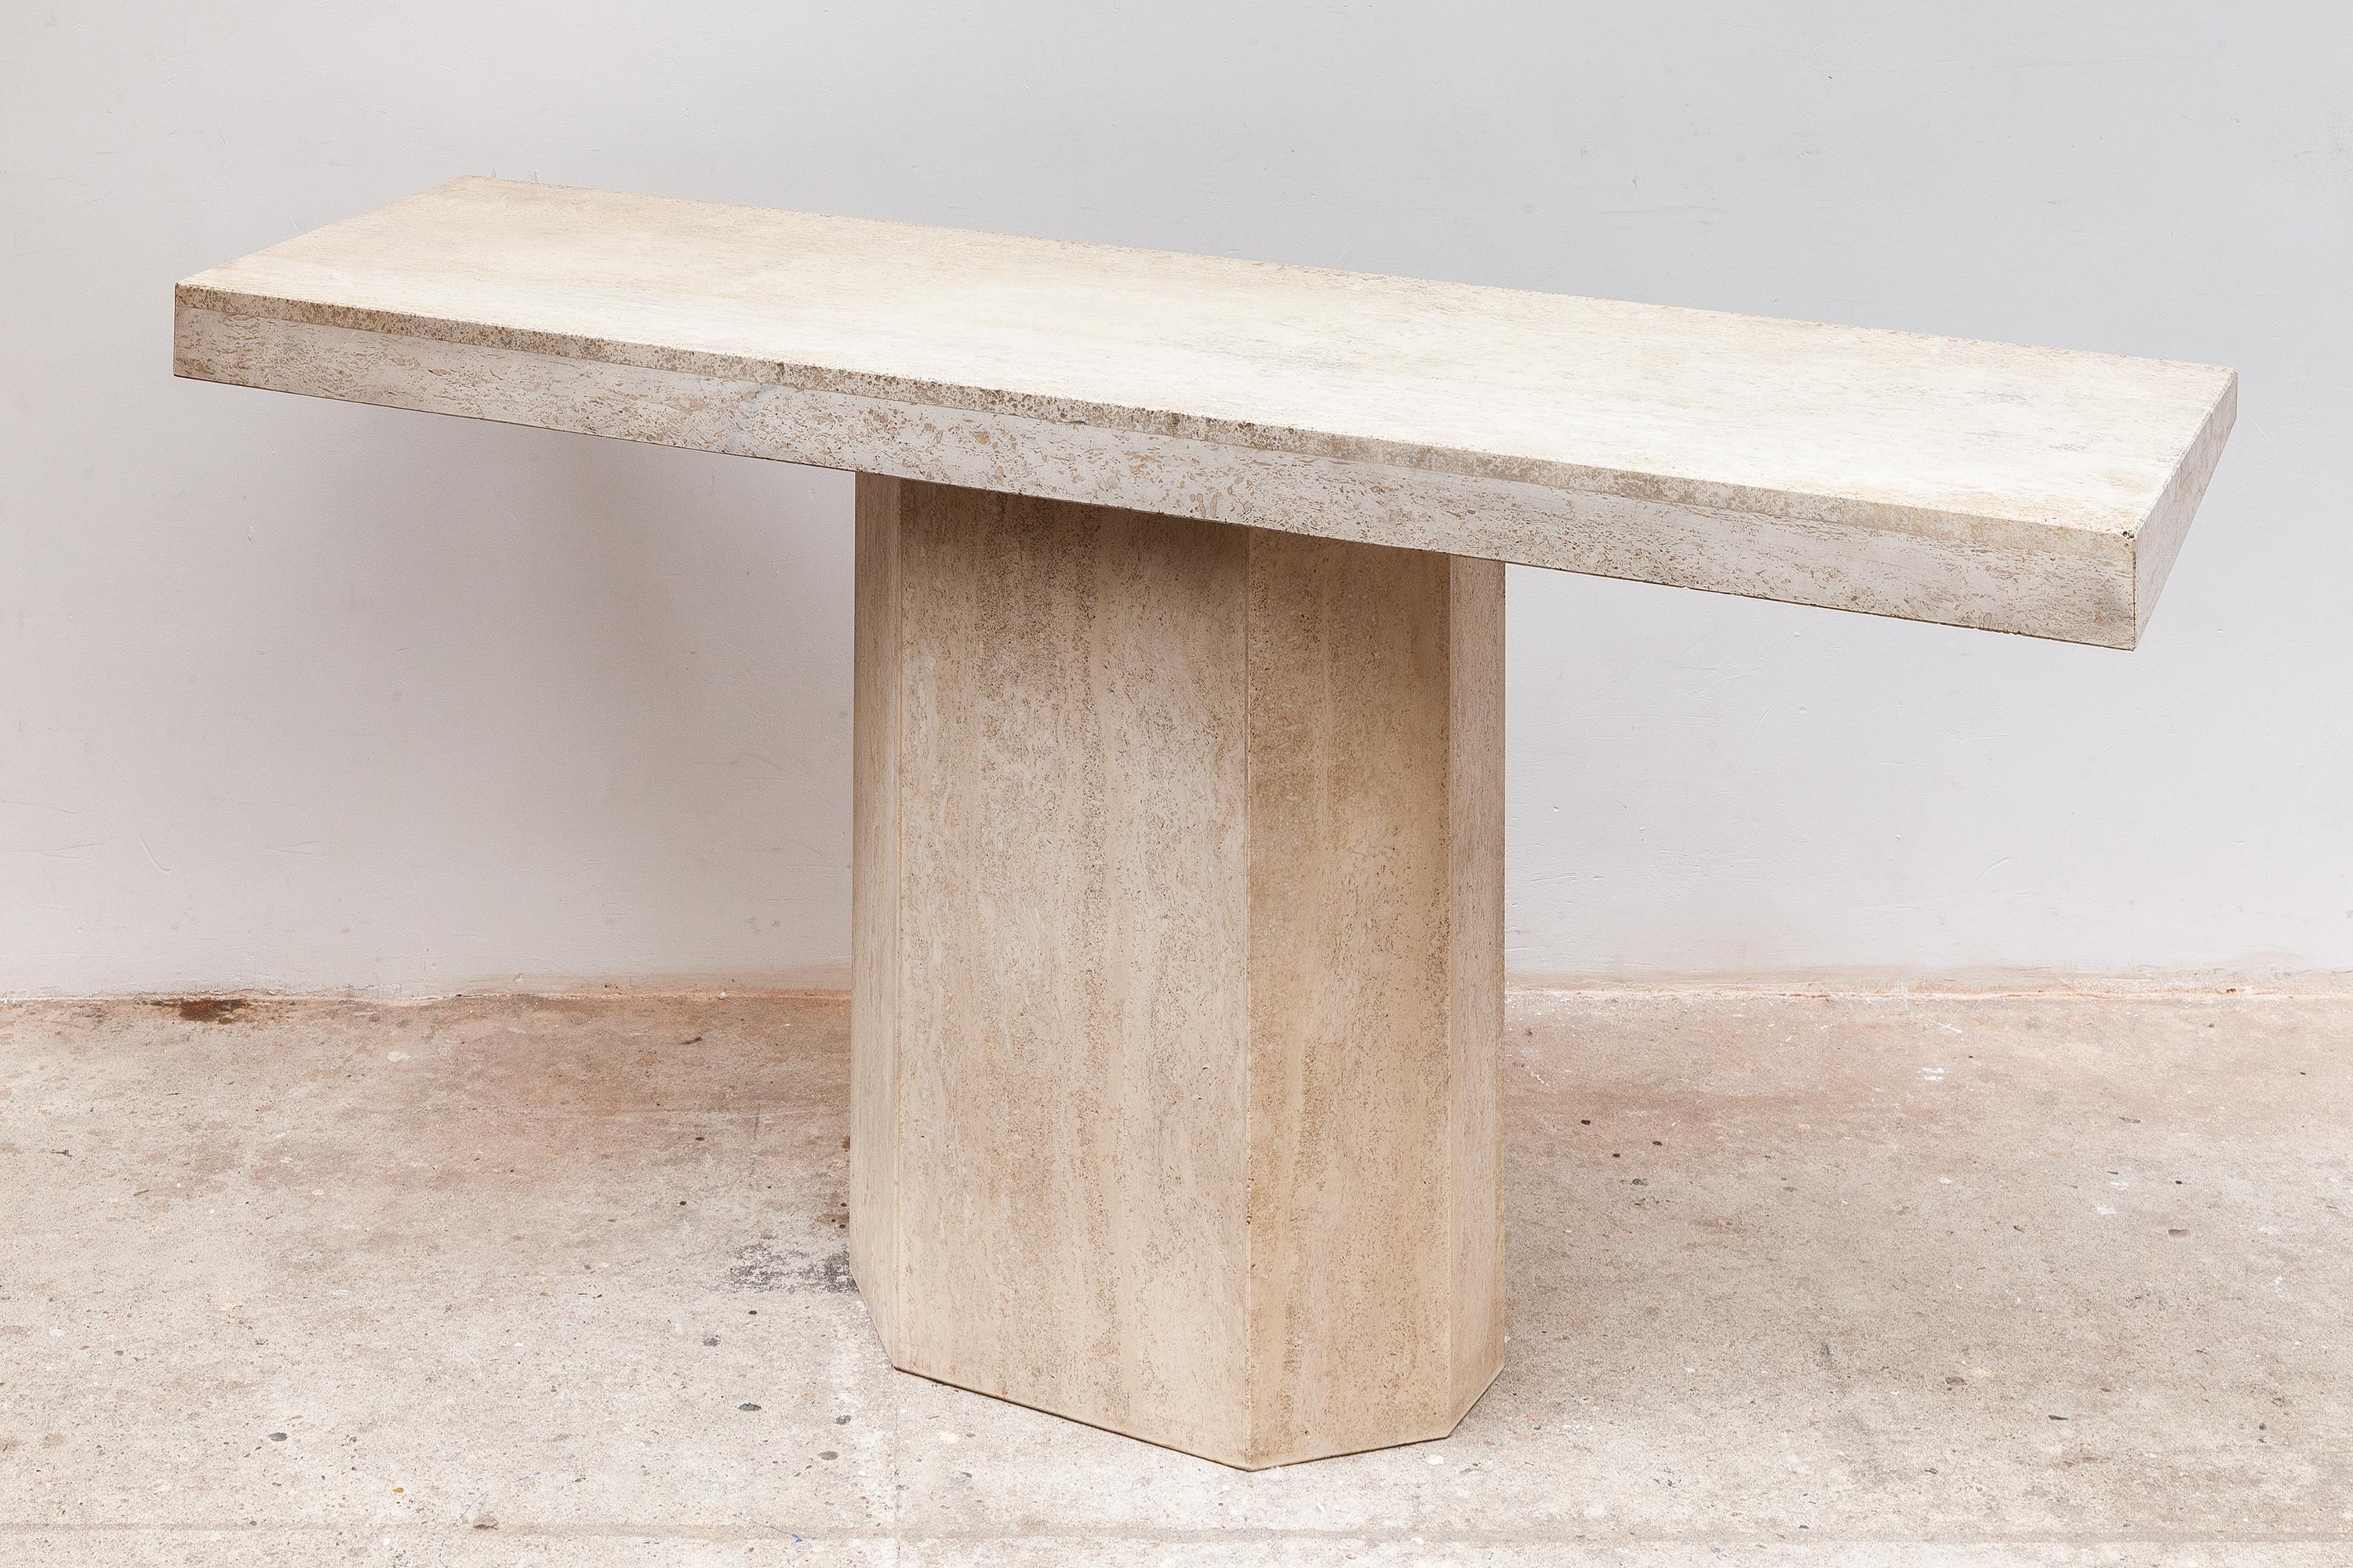 1970s travertine console or hall table. Warm beige color stone with faceted base. Dimensions: 140 W x 66 H x 40 D cm.